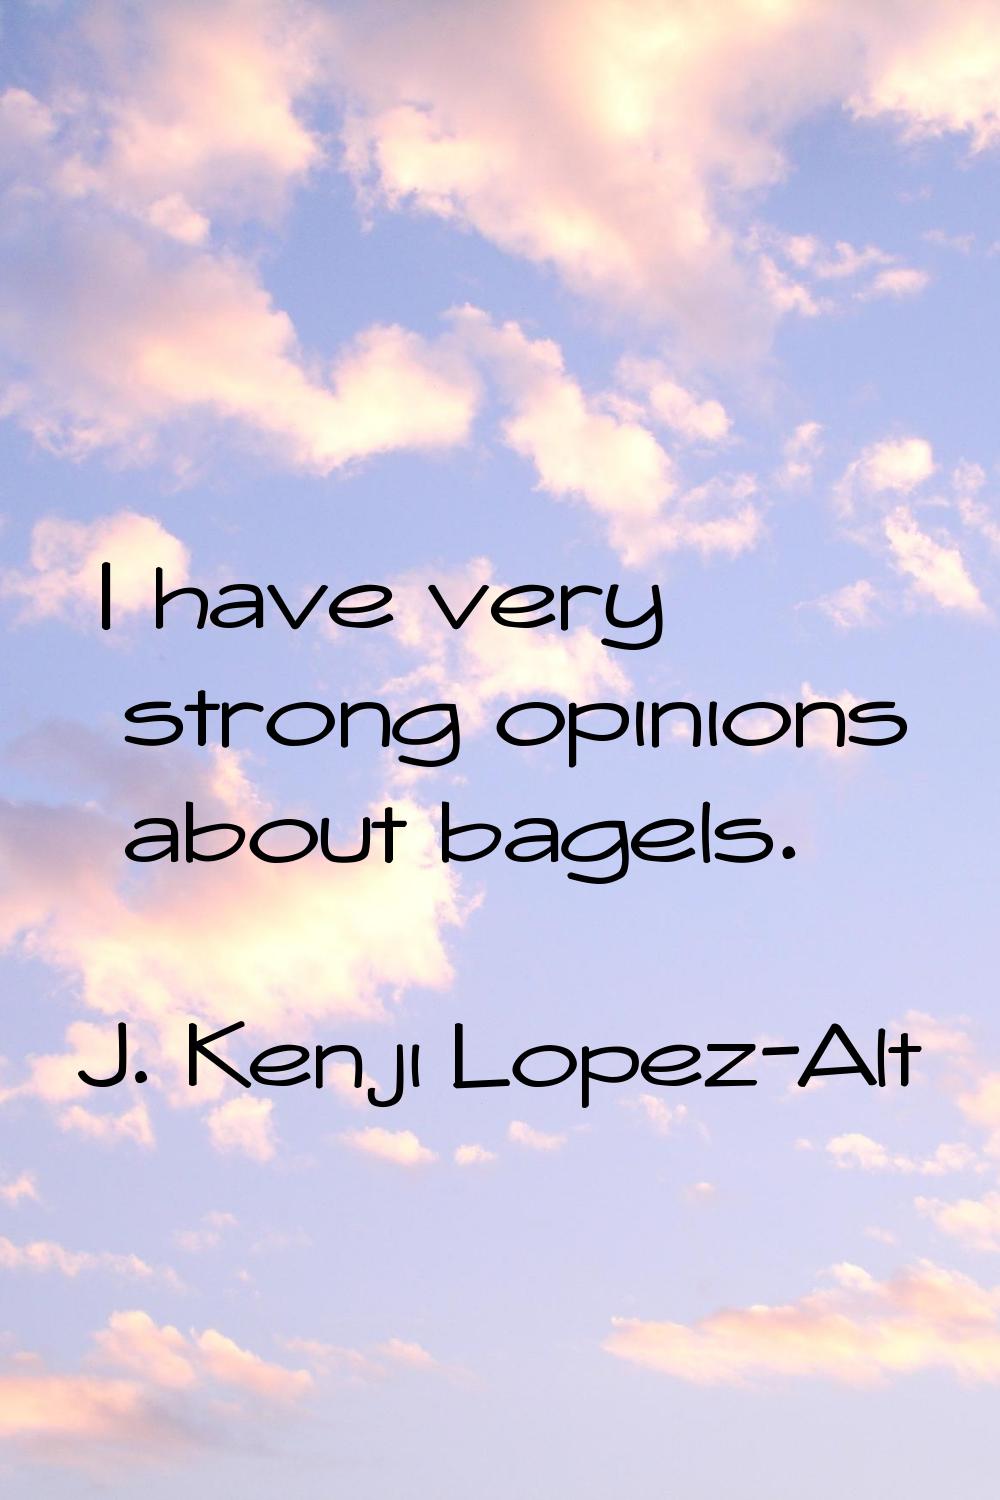 I have very strong opinions about bagels.